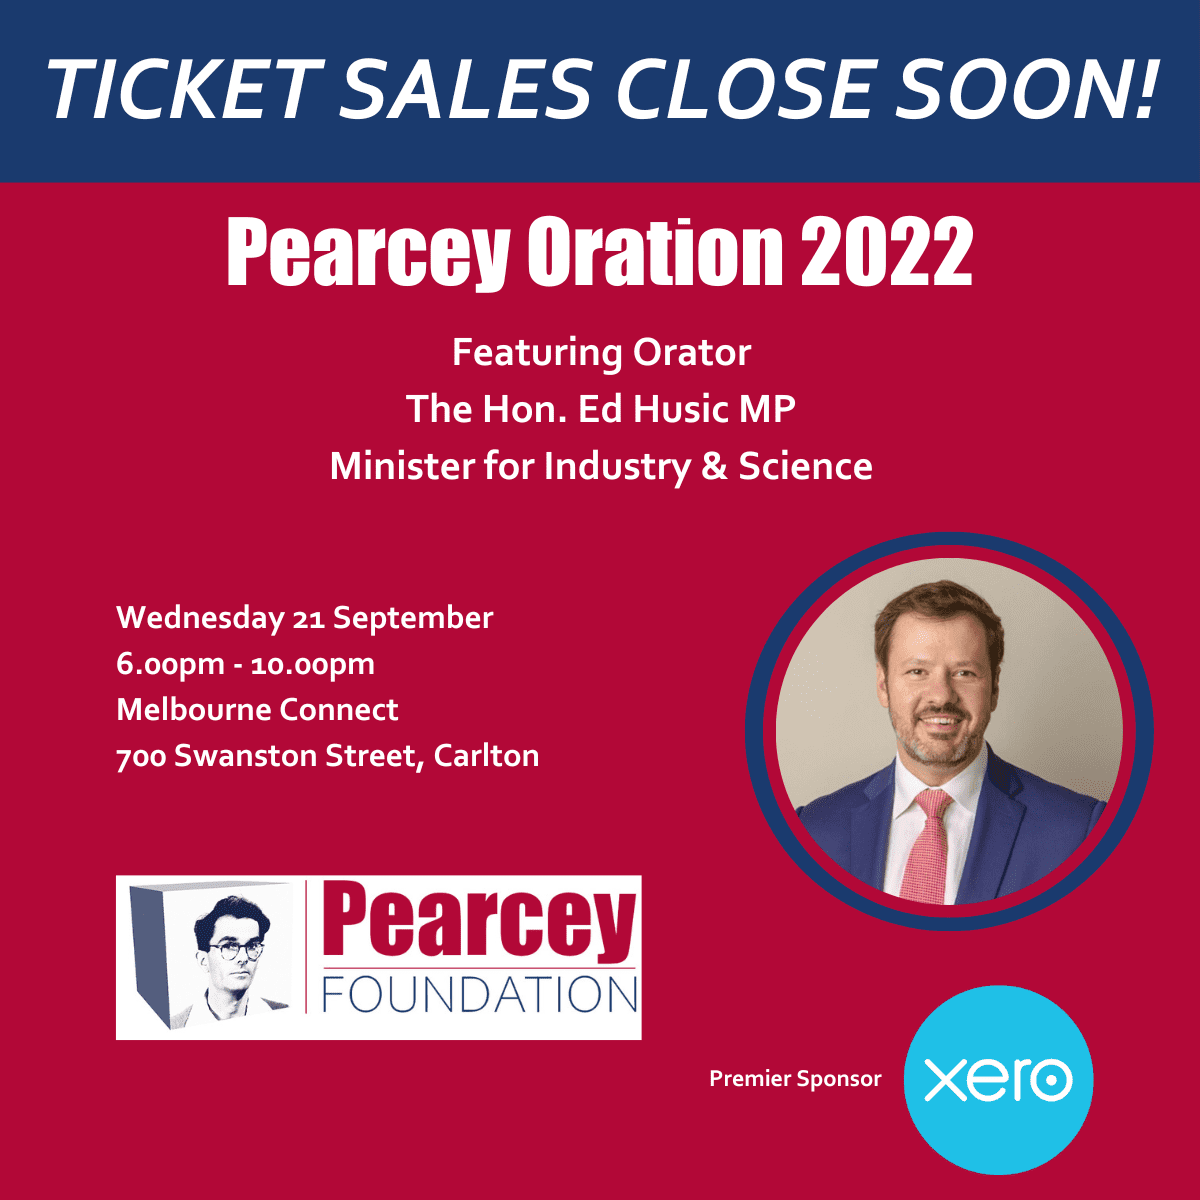 Federal Minister for Industry and Science, Ed Husic to Give the 2022 Pearcey Oration